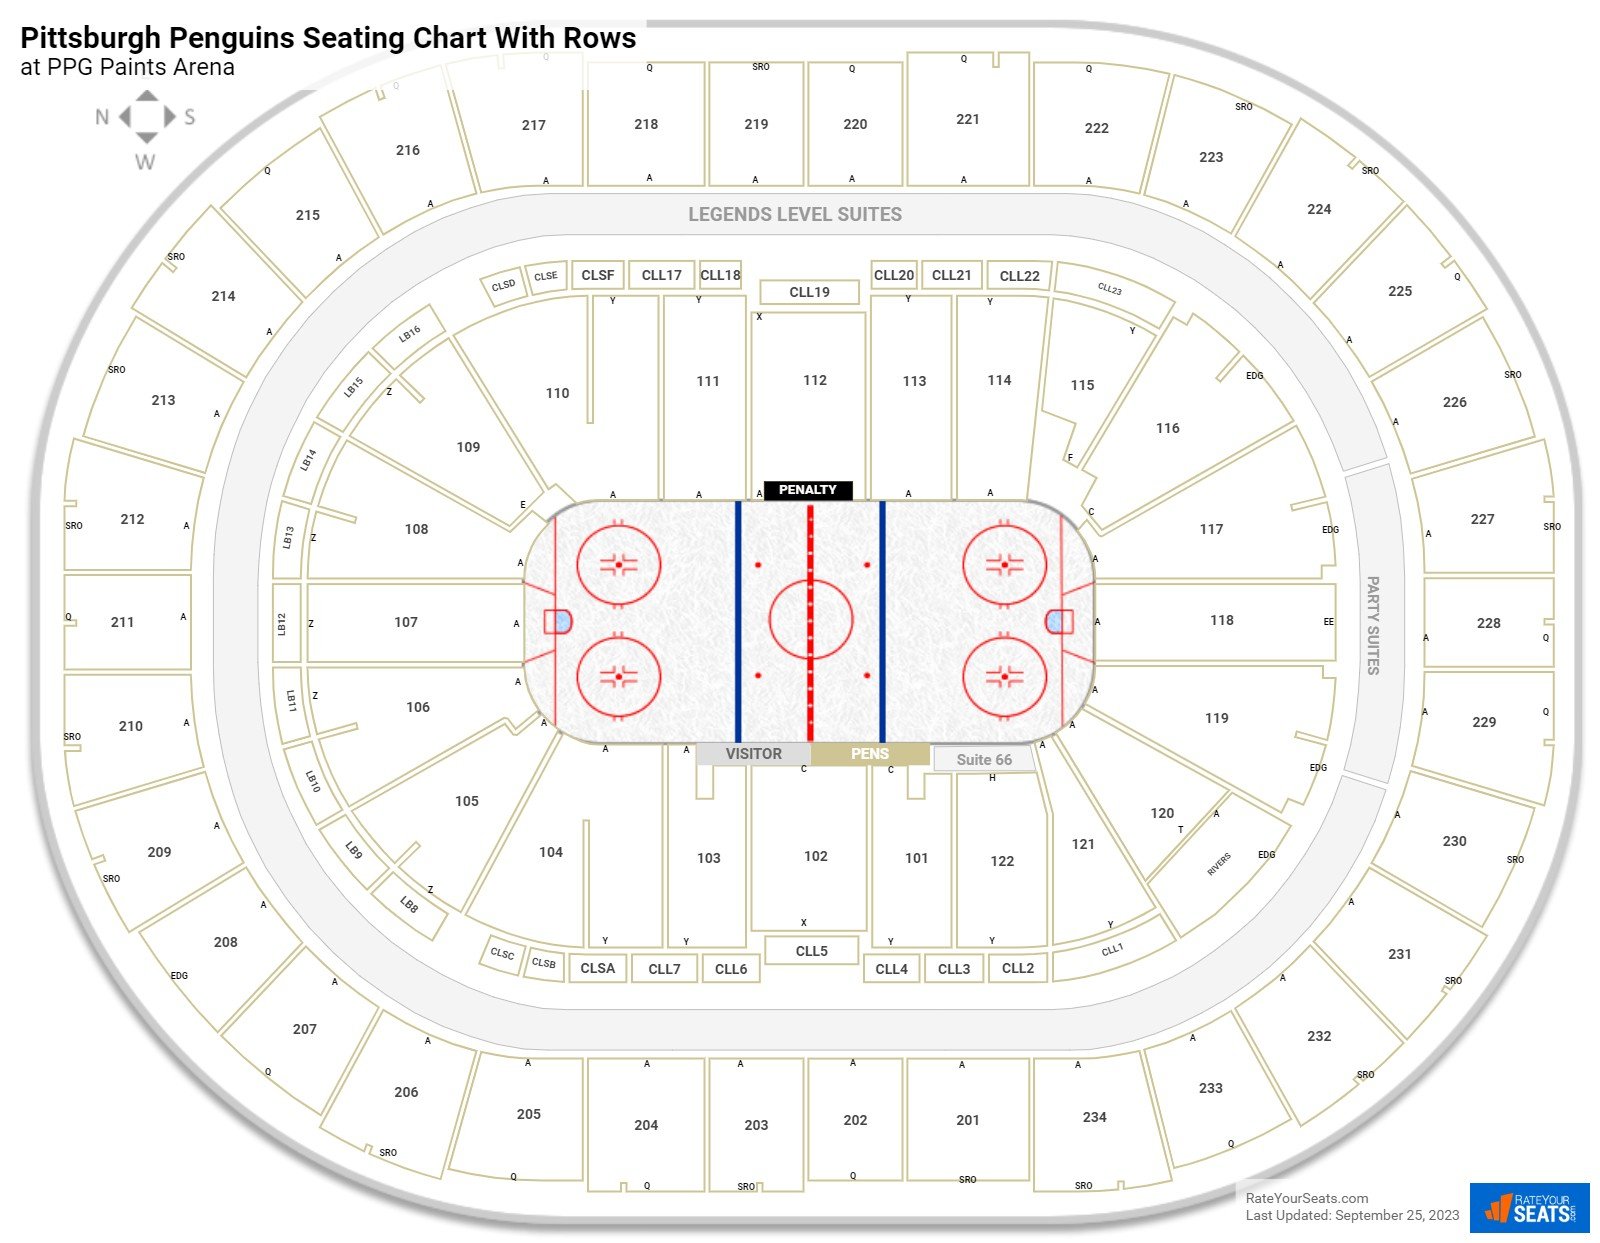 Pittsburgh Penguins Seating Charts At Ppg Paints Arena Rateyourseats Com